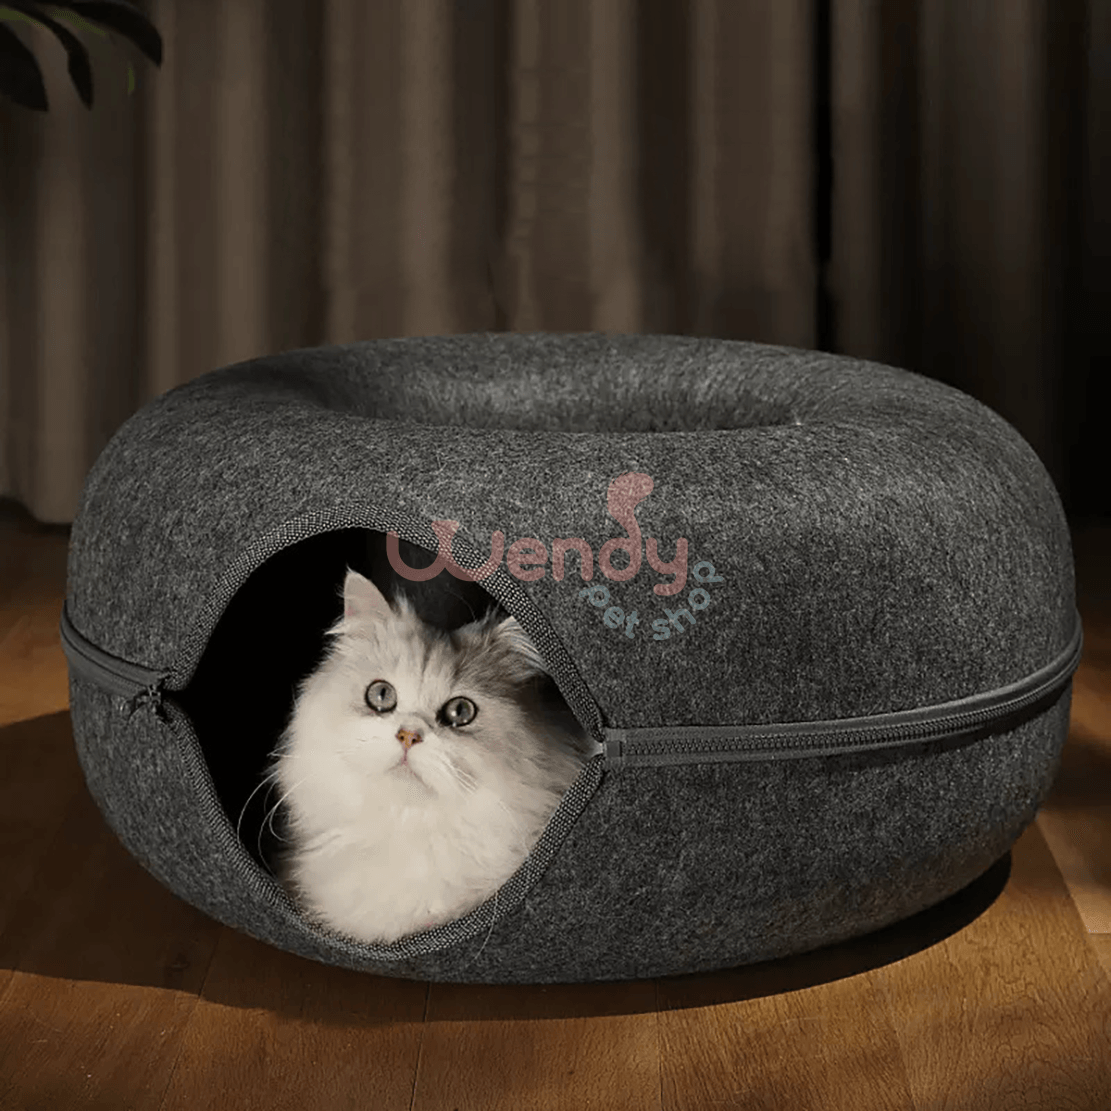 10% OFF - 2X "Hide-and-seek" Wendy Cat Tunnel Bed - Wendy Pet Shop 